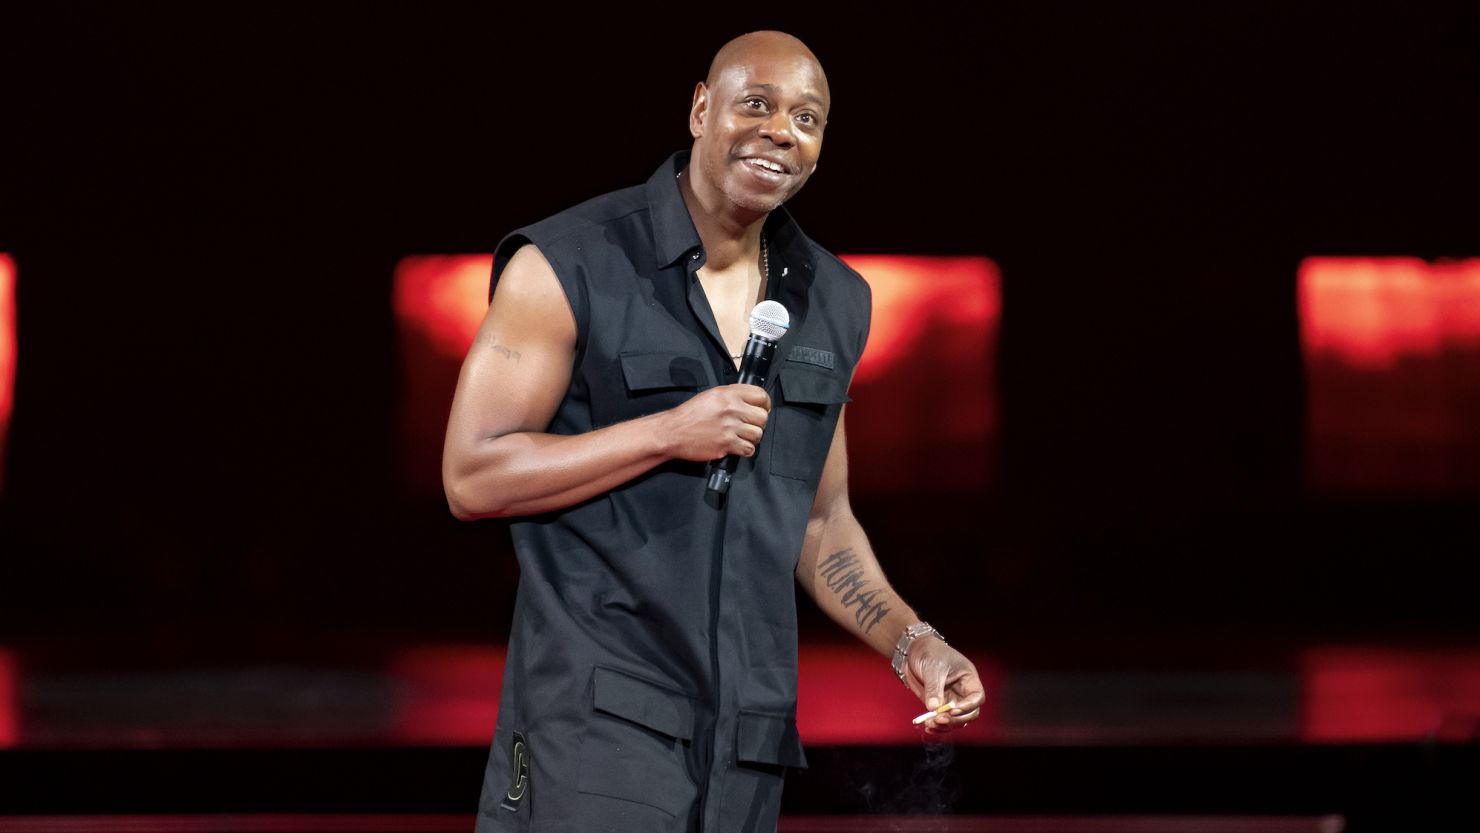 Dave Chappelle previews his New Year’s Eve special with some help from